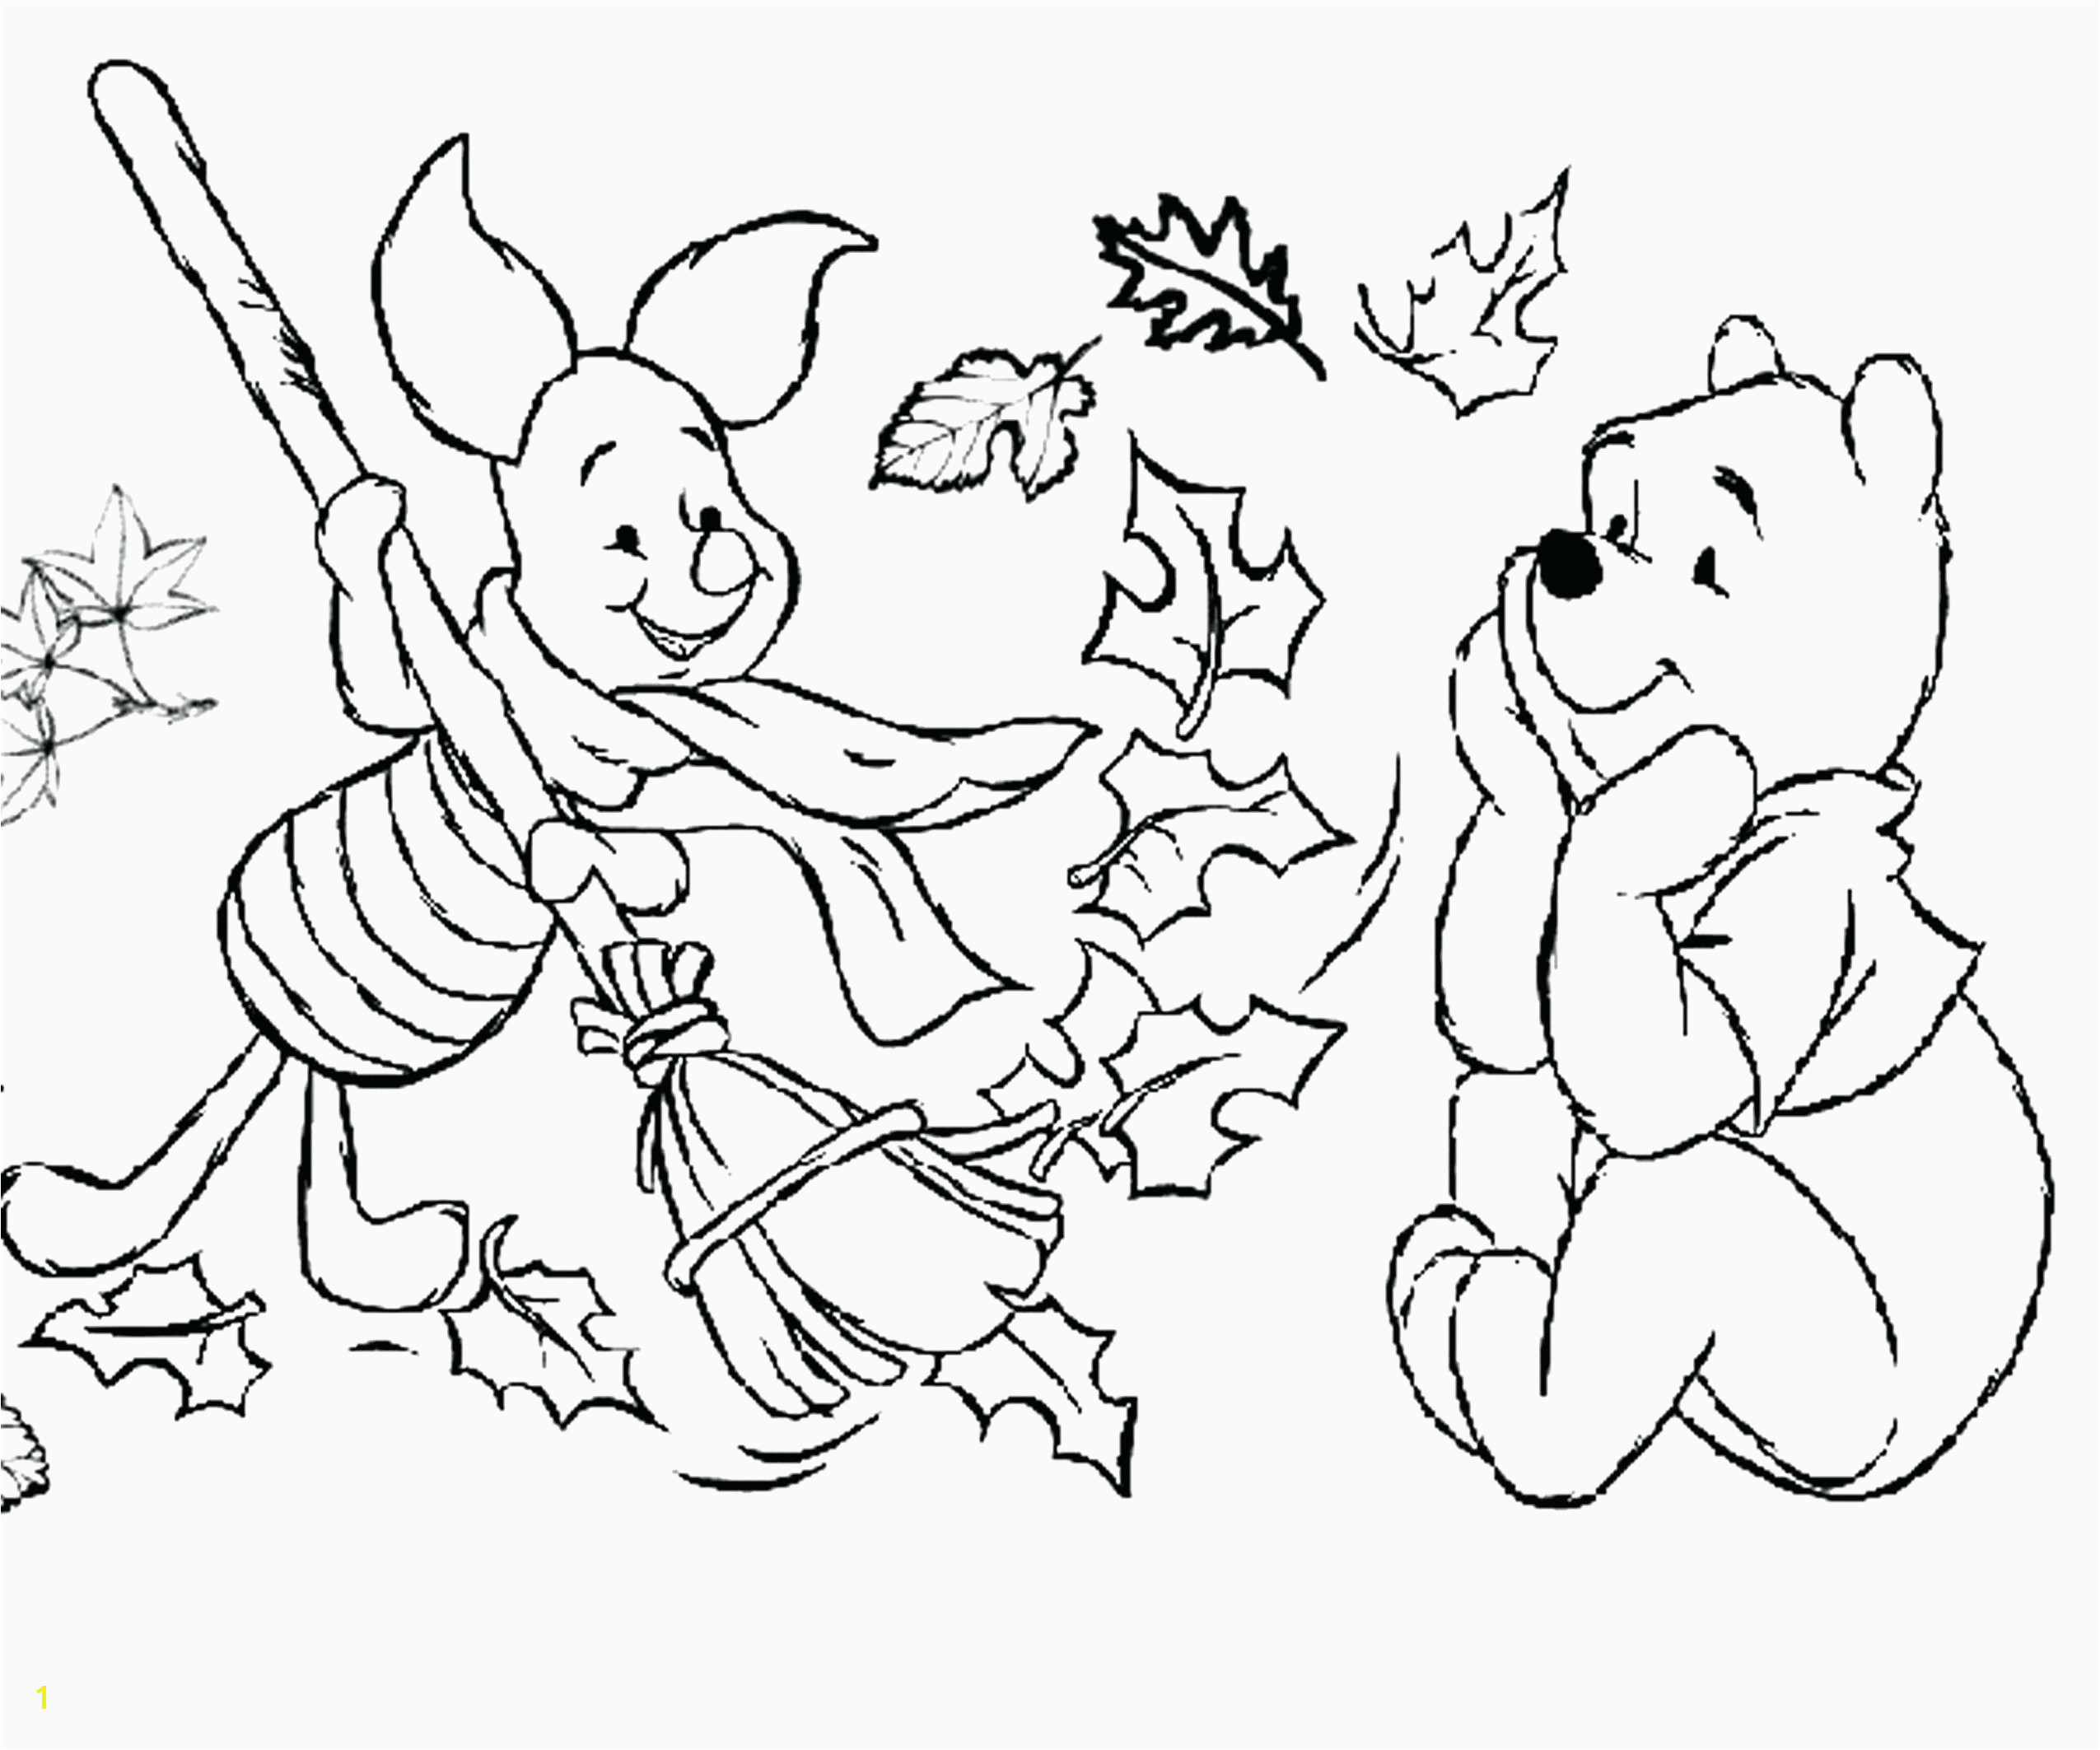 Fall Coloring Pages for Adults Spider Coloring Pages Collection thephotosync